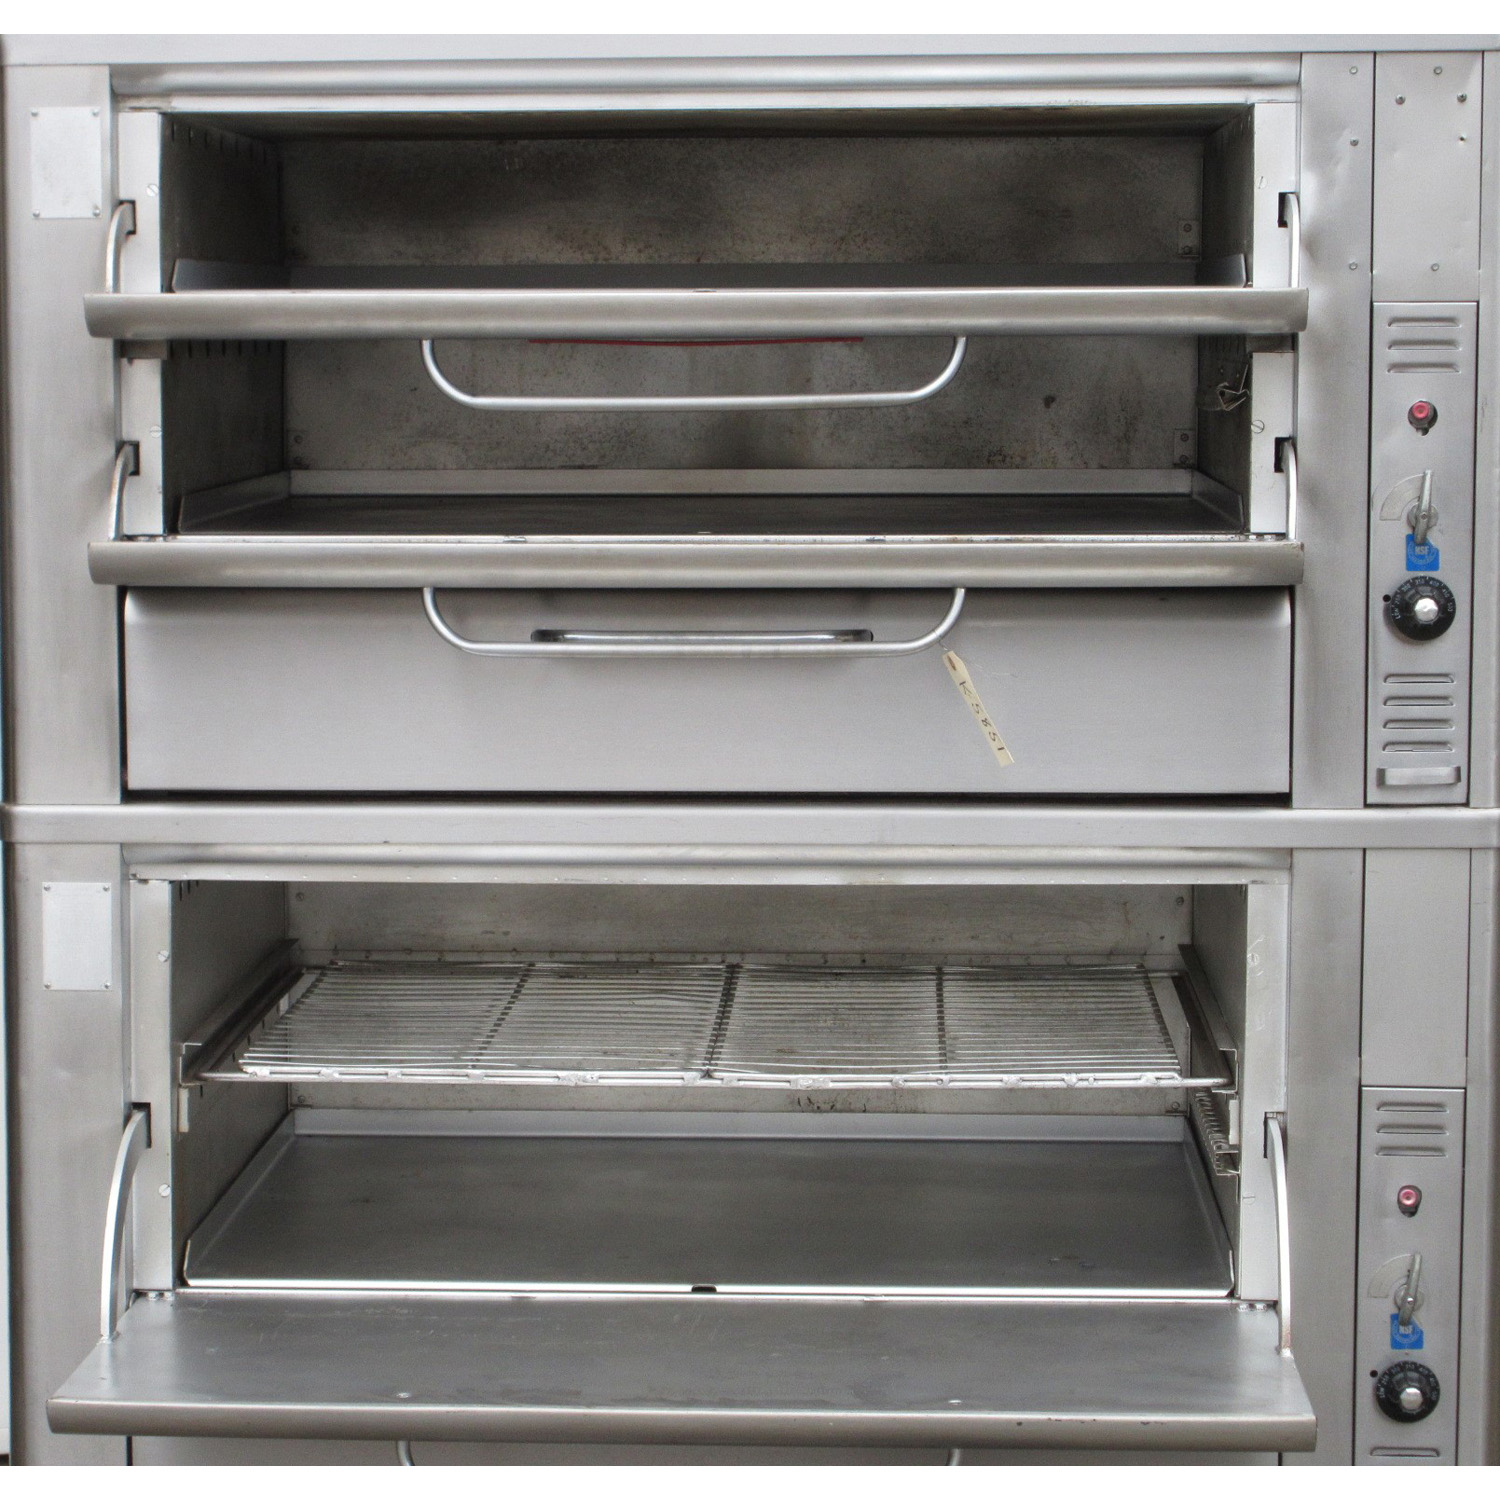 Blodgett 981-966 3 Deck Gas Oven, Used Excellent Condition image 2